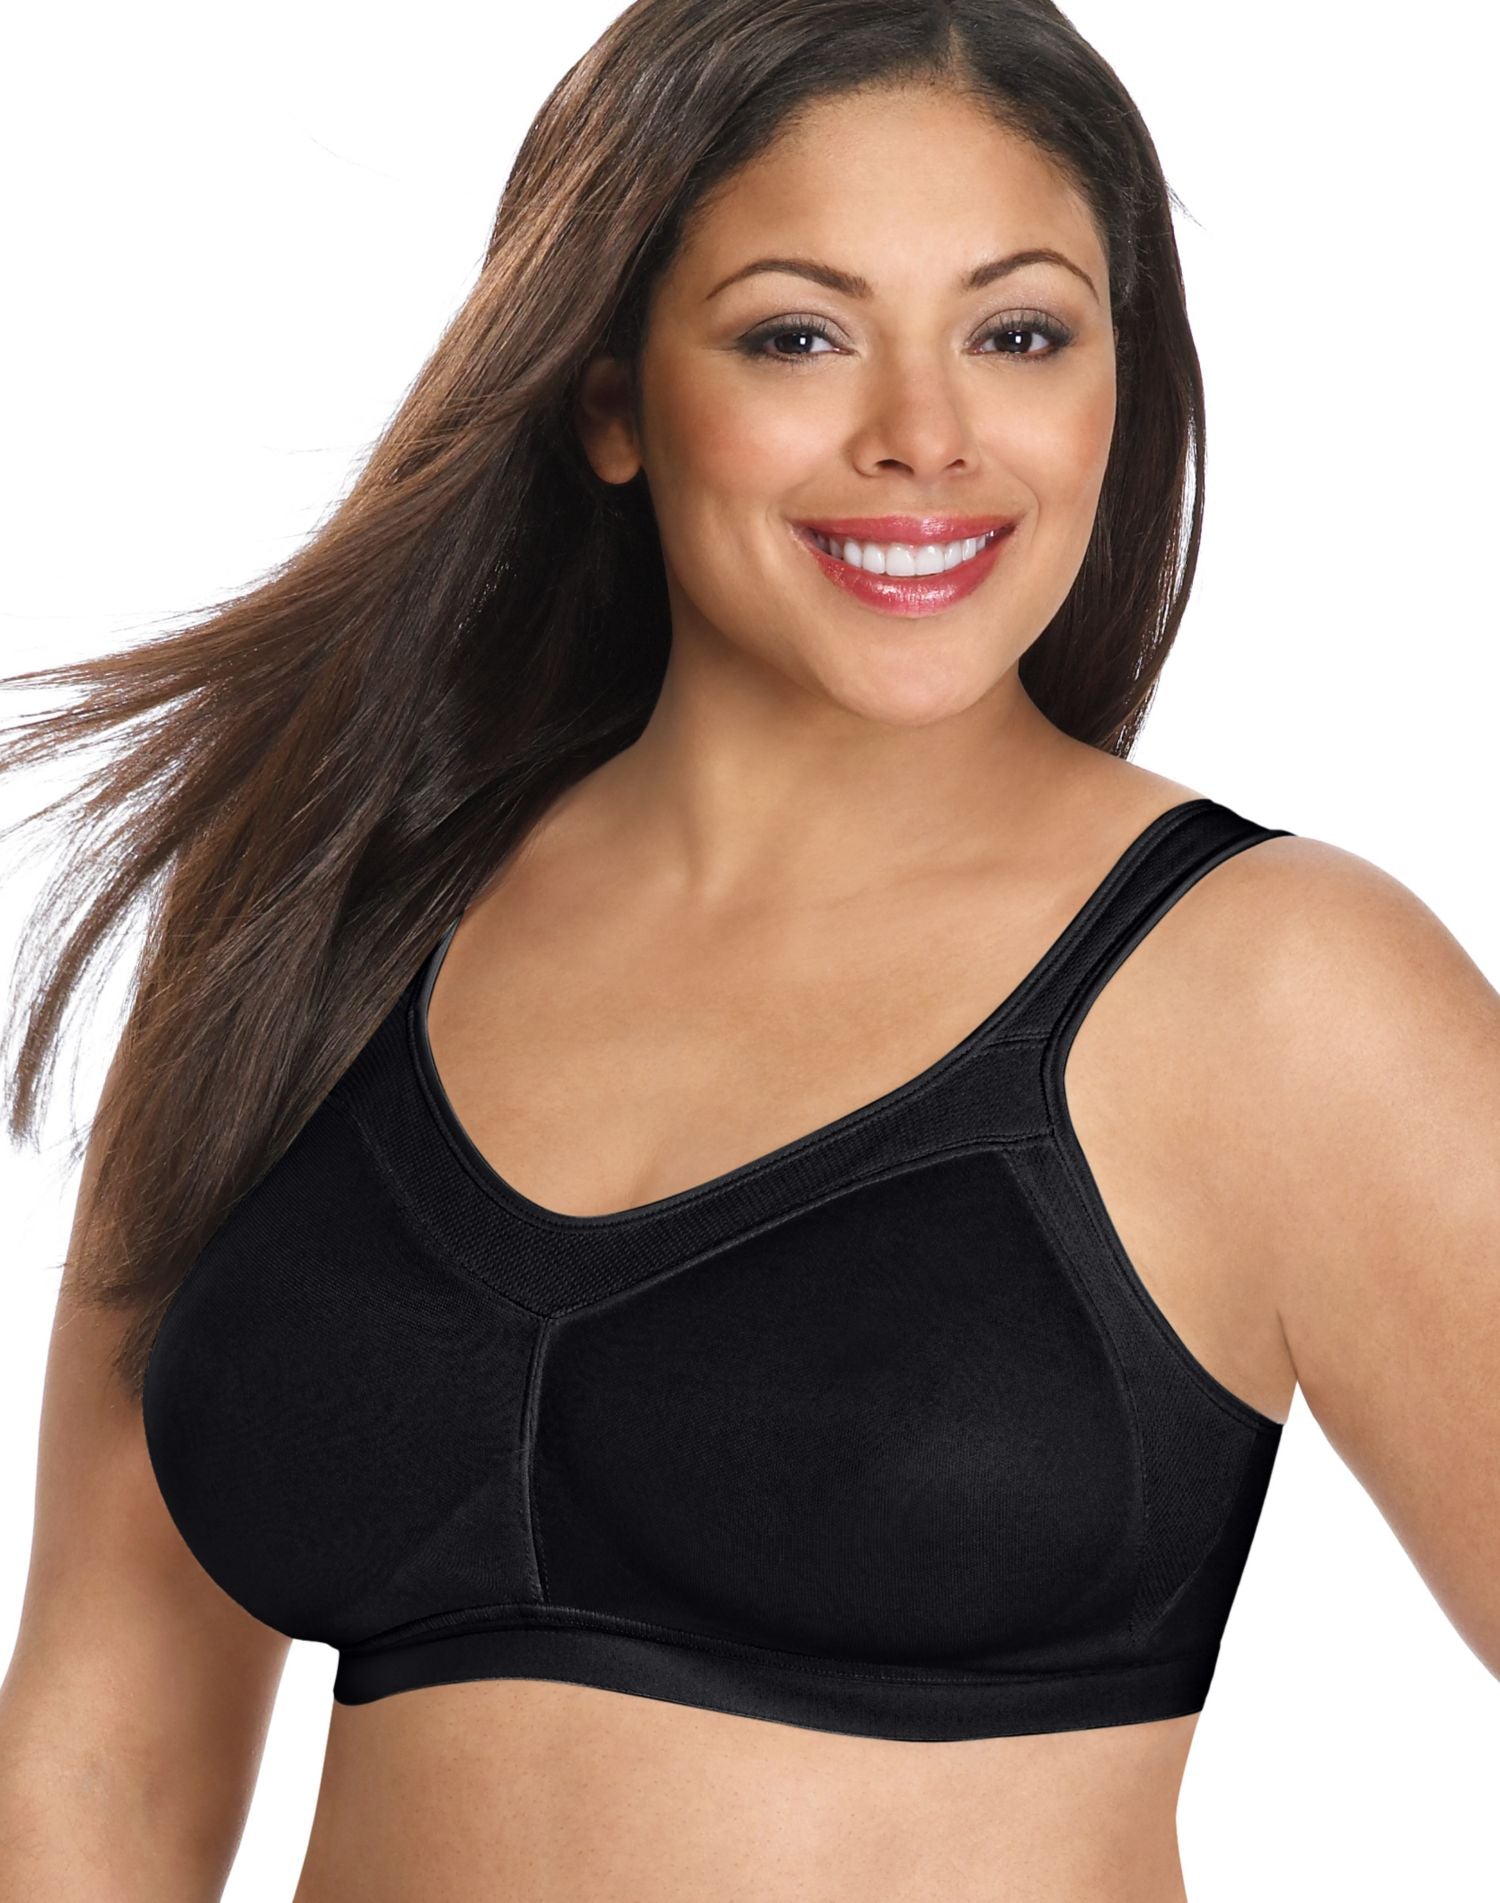 Playtex Womens 18 Hour Cooling Comfort Wire-Free Sports Bra Style-4159 